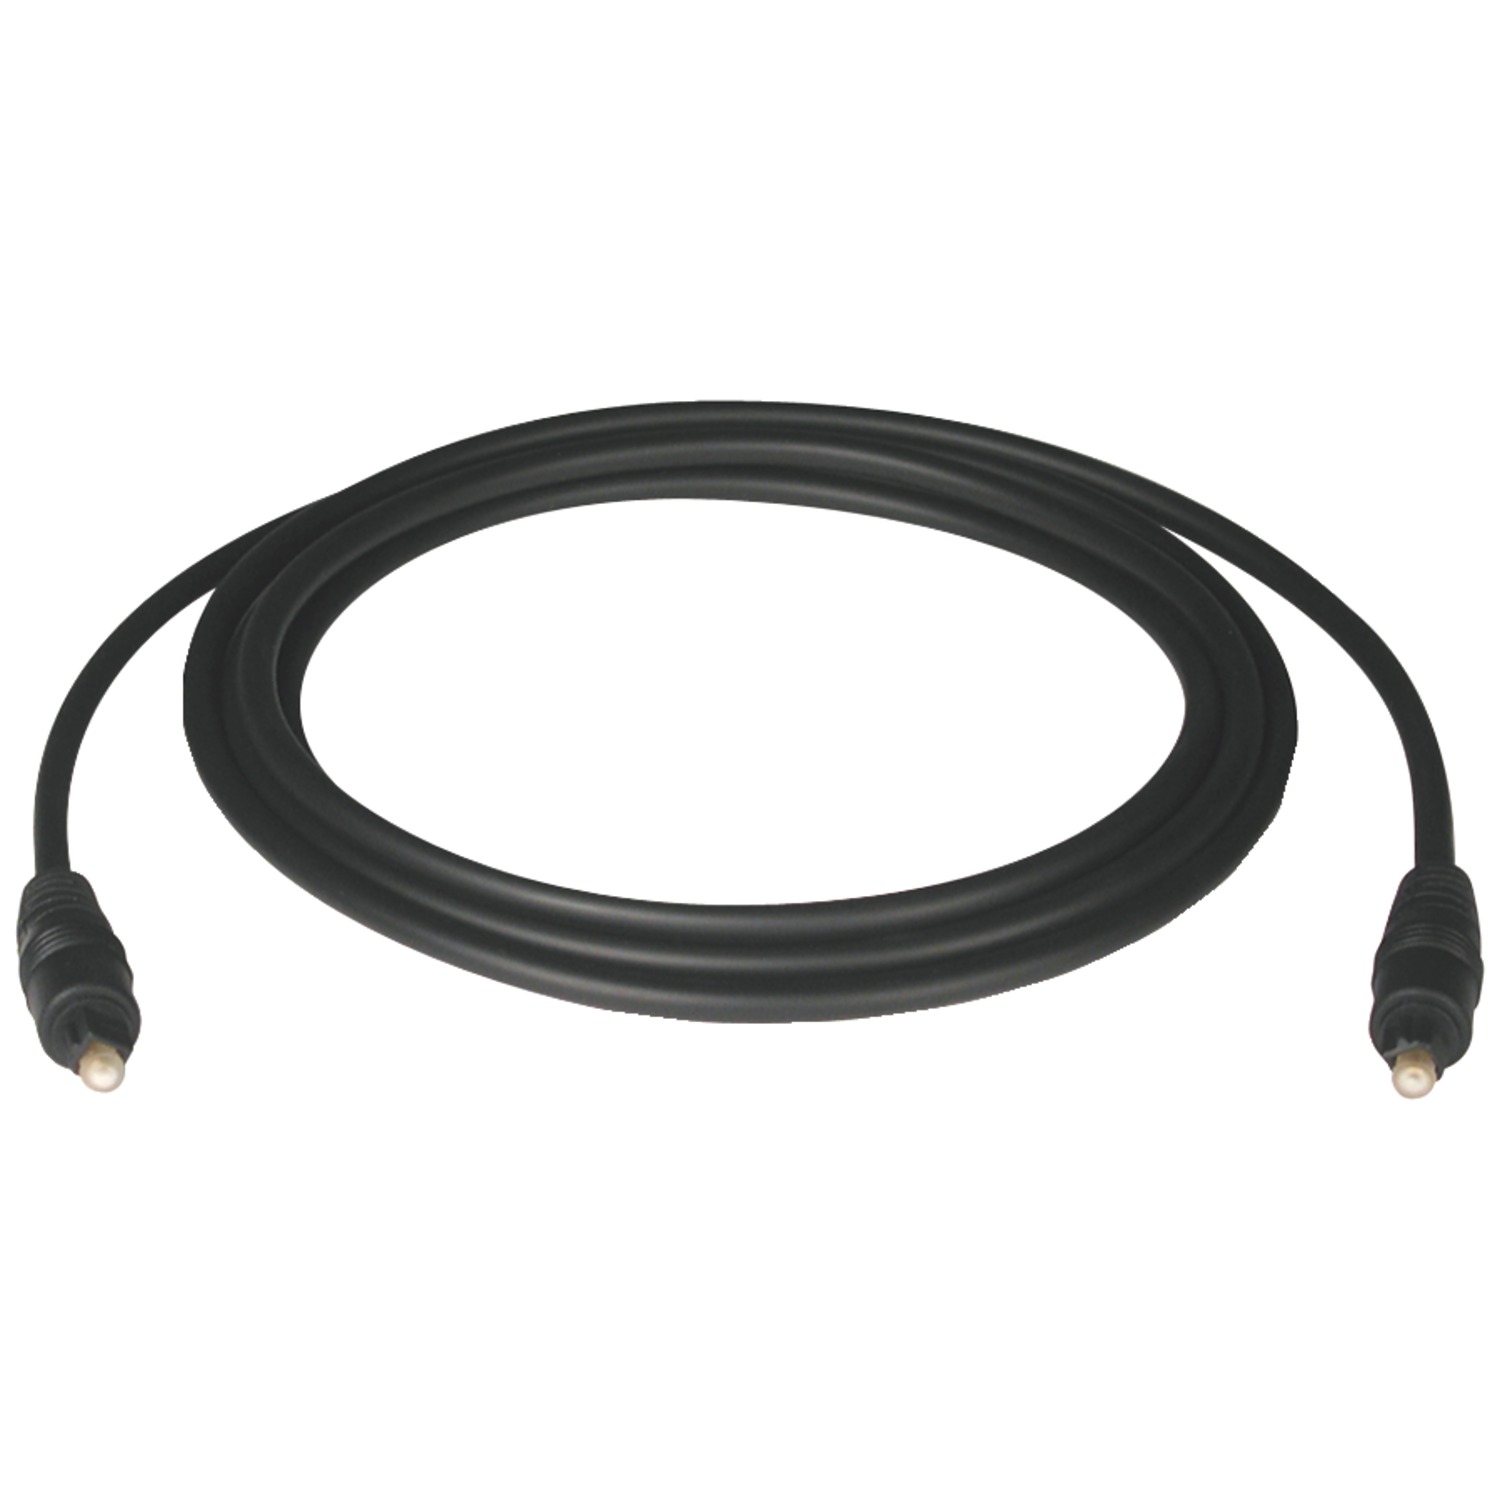 Tripp Lite A102-04m Tosl digitl Optical Spdif Audio Cable (13ft) - image 4 of 4